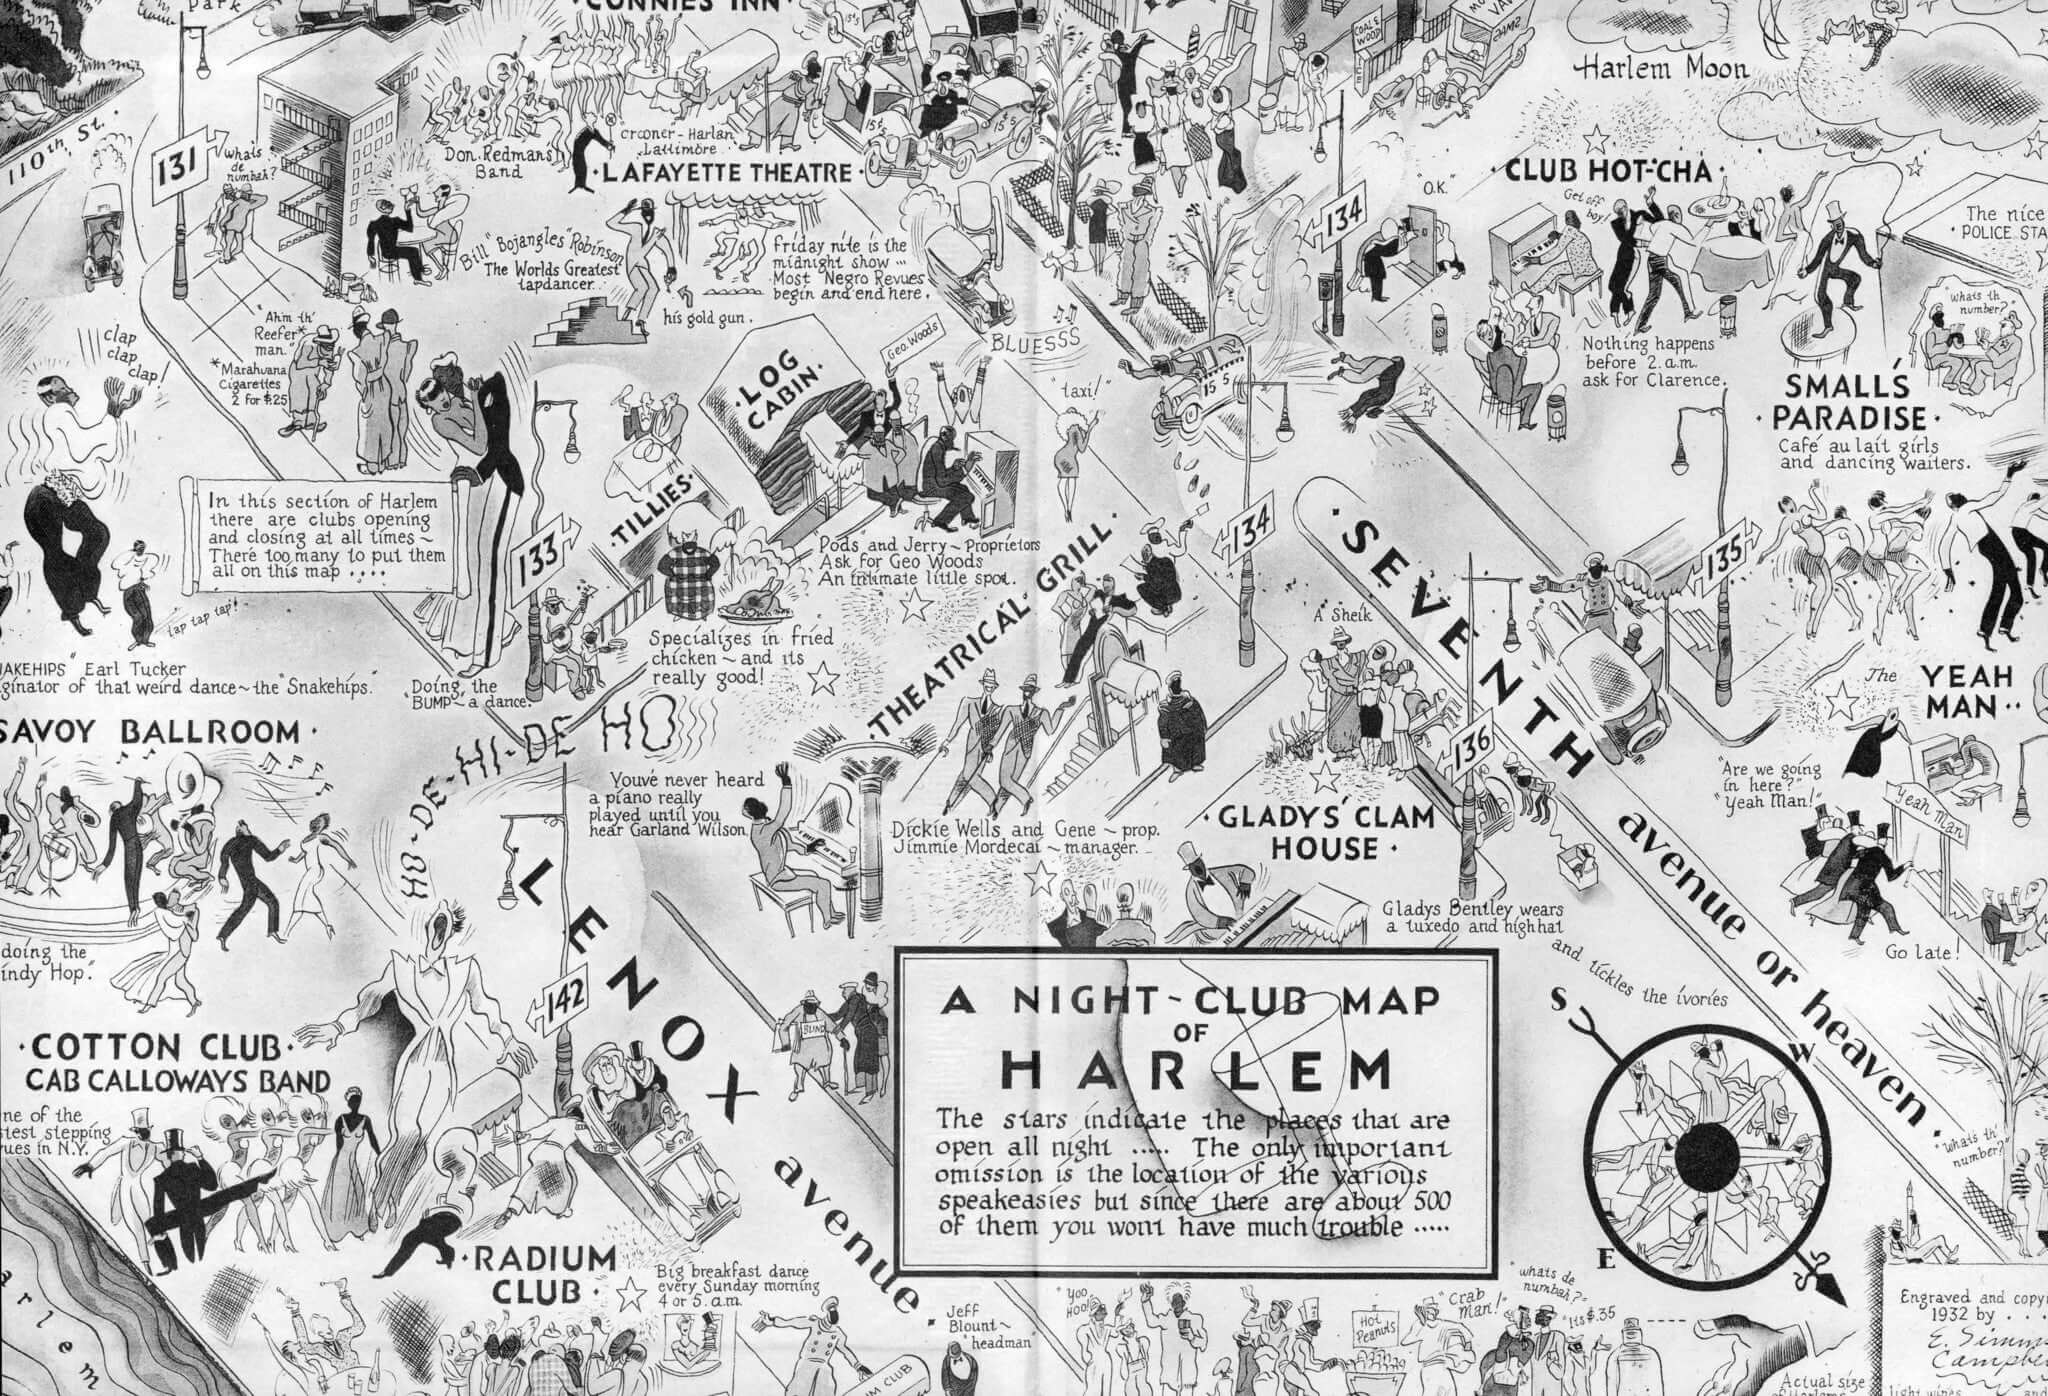 This is an illustration of the night club map of Harlem by artist E. Simms Campbell